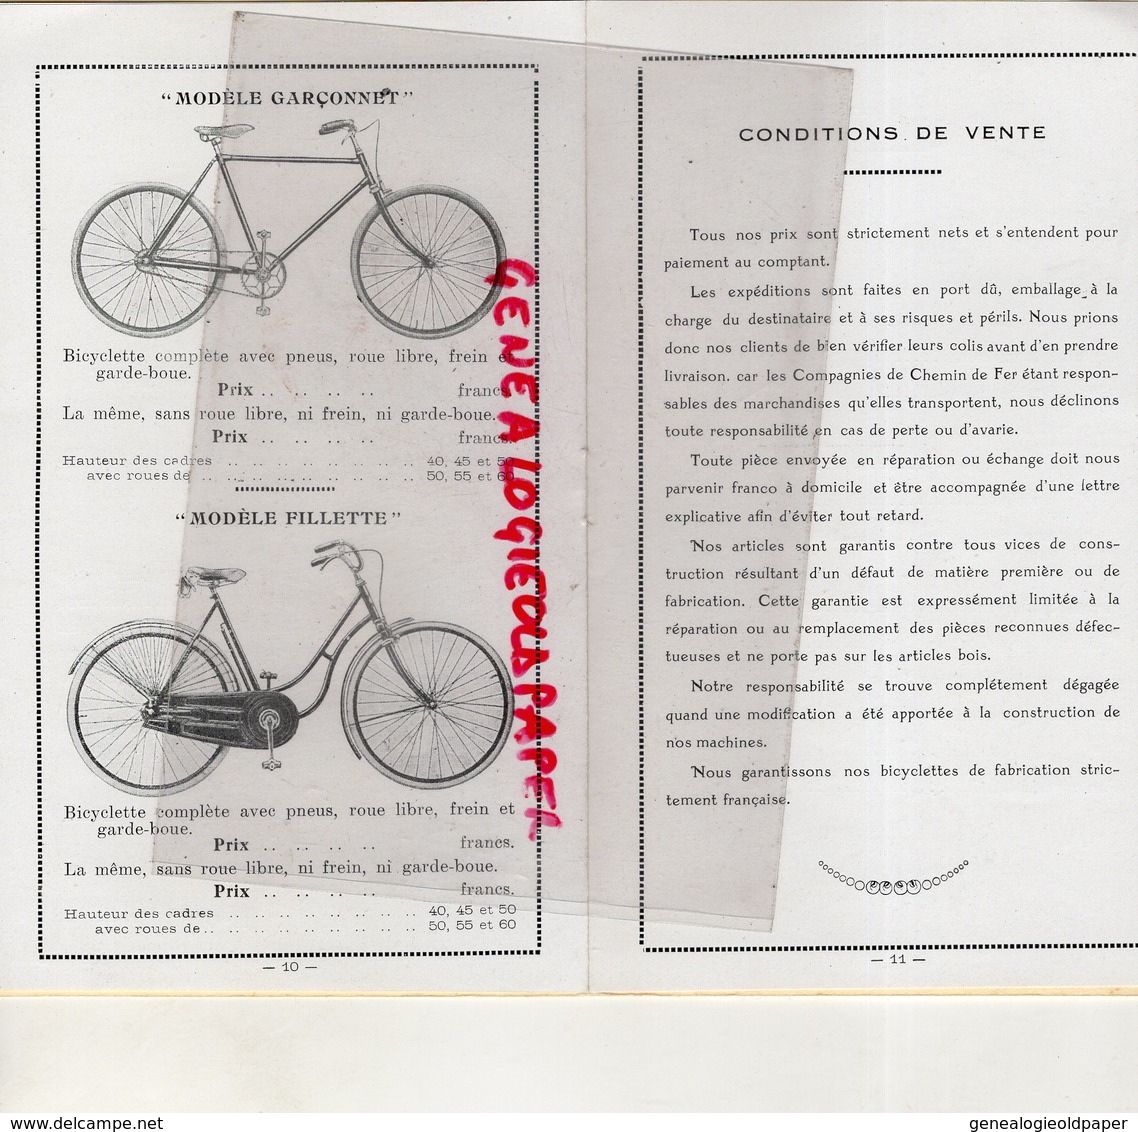 37- TOURS- CATALOGUE CYCLES BETTINA- VELO- CYCLISME- 105 RUE DES HALLES-26 RUE CHATEAUNEUF-